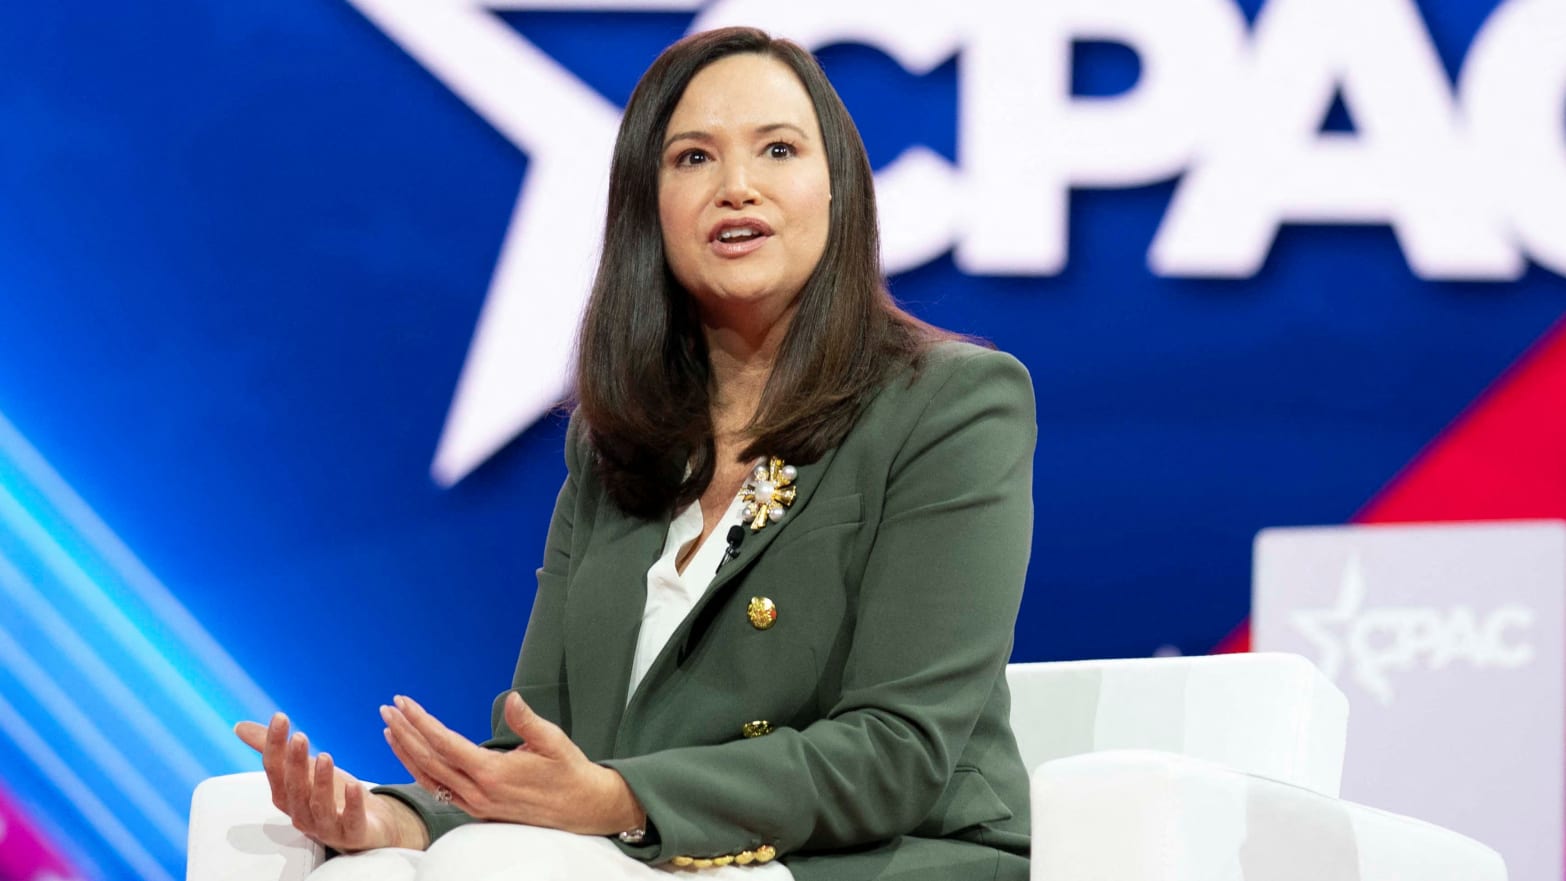 Florida Attorney General Ashley Moody speaks at the Conservative Political Action Conference (CPAC) at Gaylord National Convention Center in National Harbor, Maryland